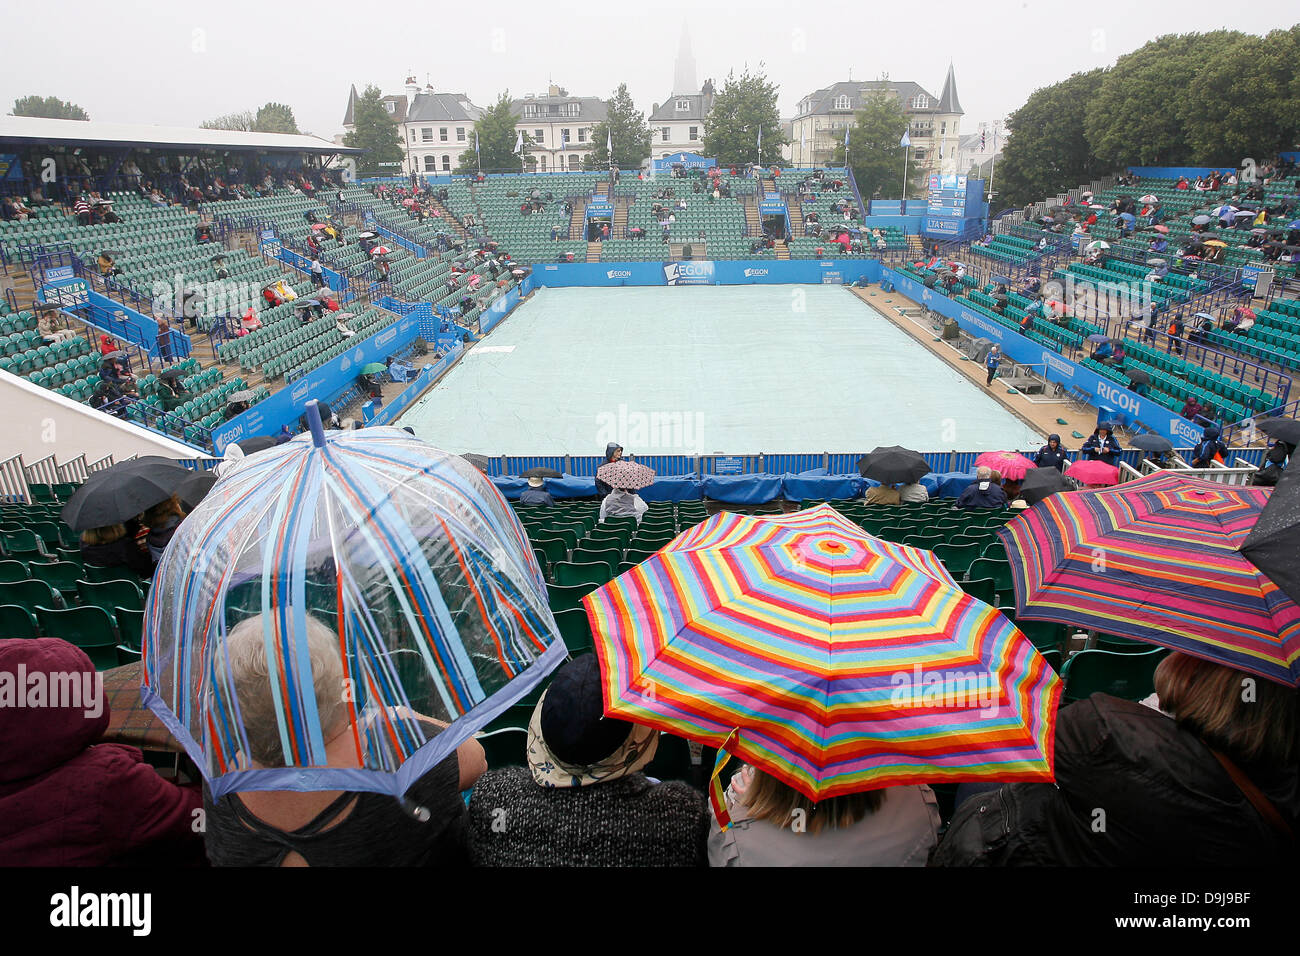 Eastbourne, UK. 20th June, 2013. Rain delays all matches at the AEGON International tournament at Devonshire Park Stock Photo